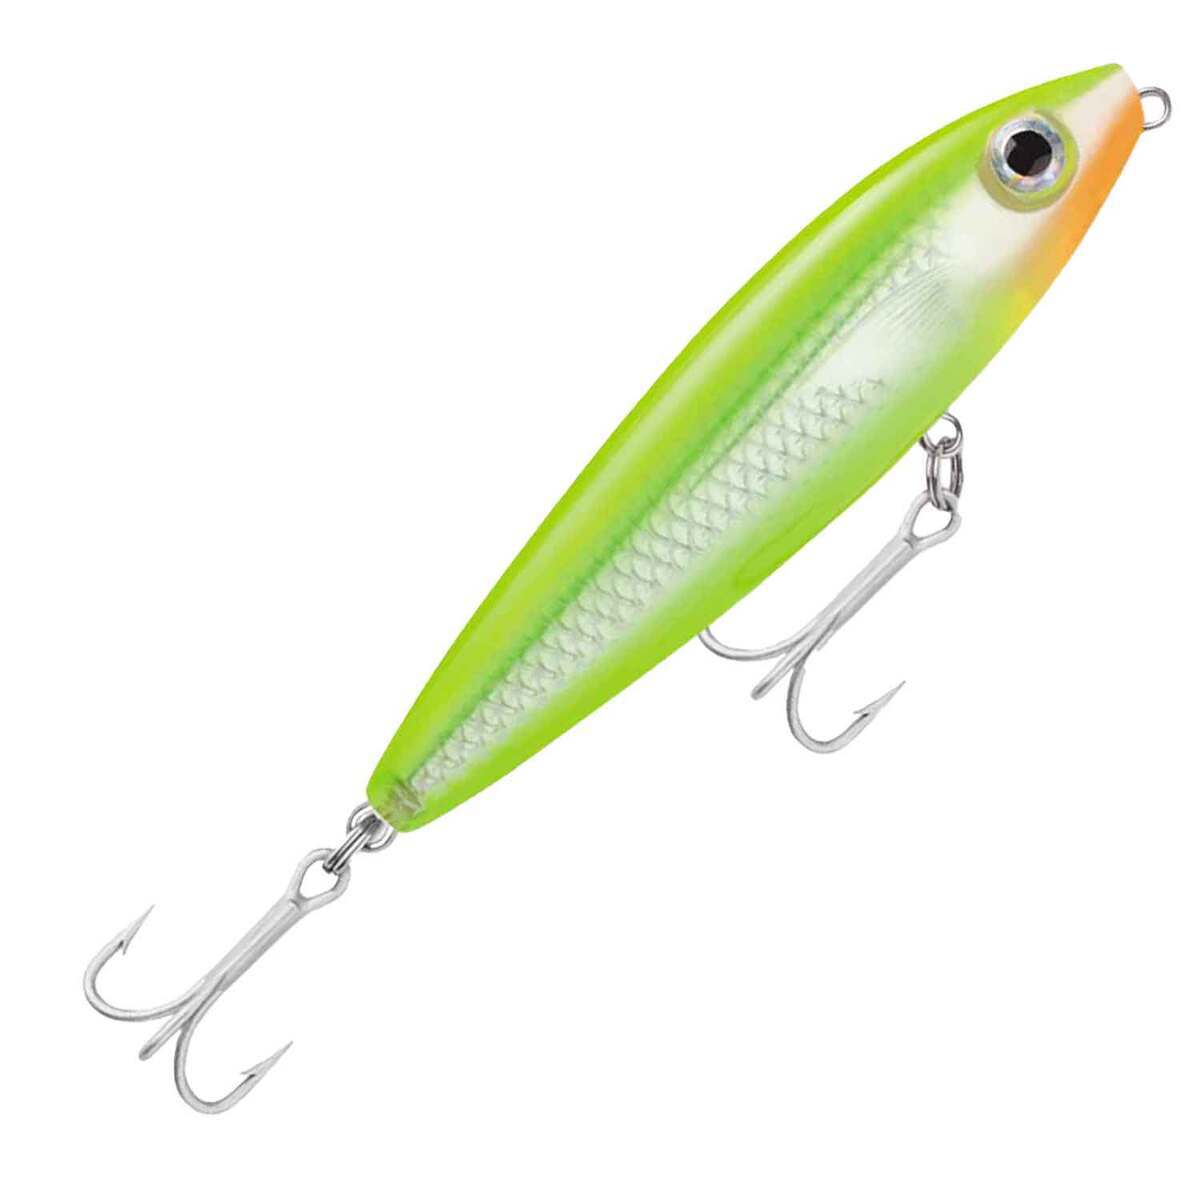 Rapala Saltwater Skitter Walk Topwater Bait - Hot Chartreuse, 5/8oz,  4-3/8in